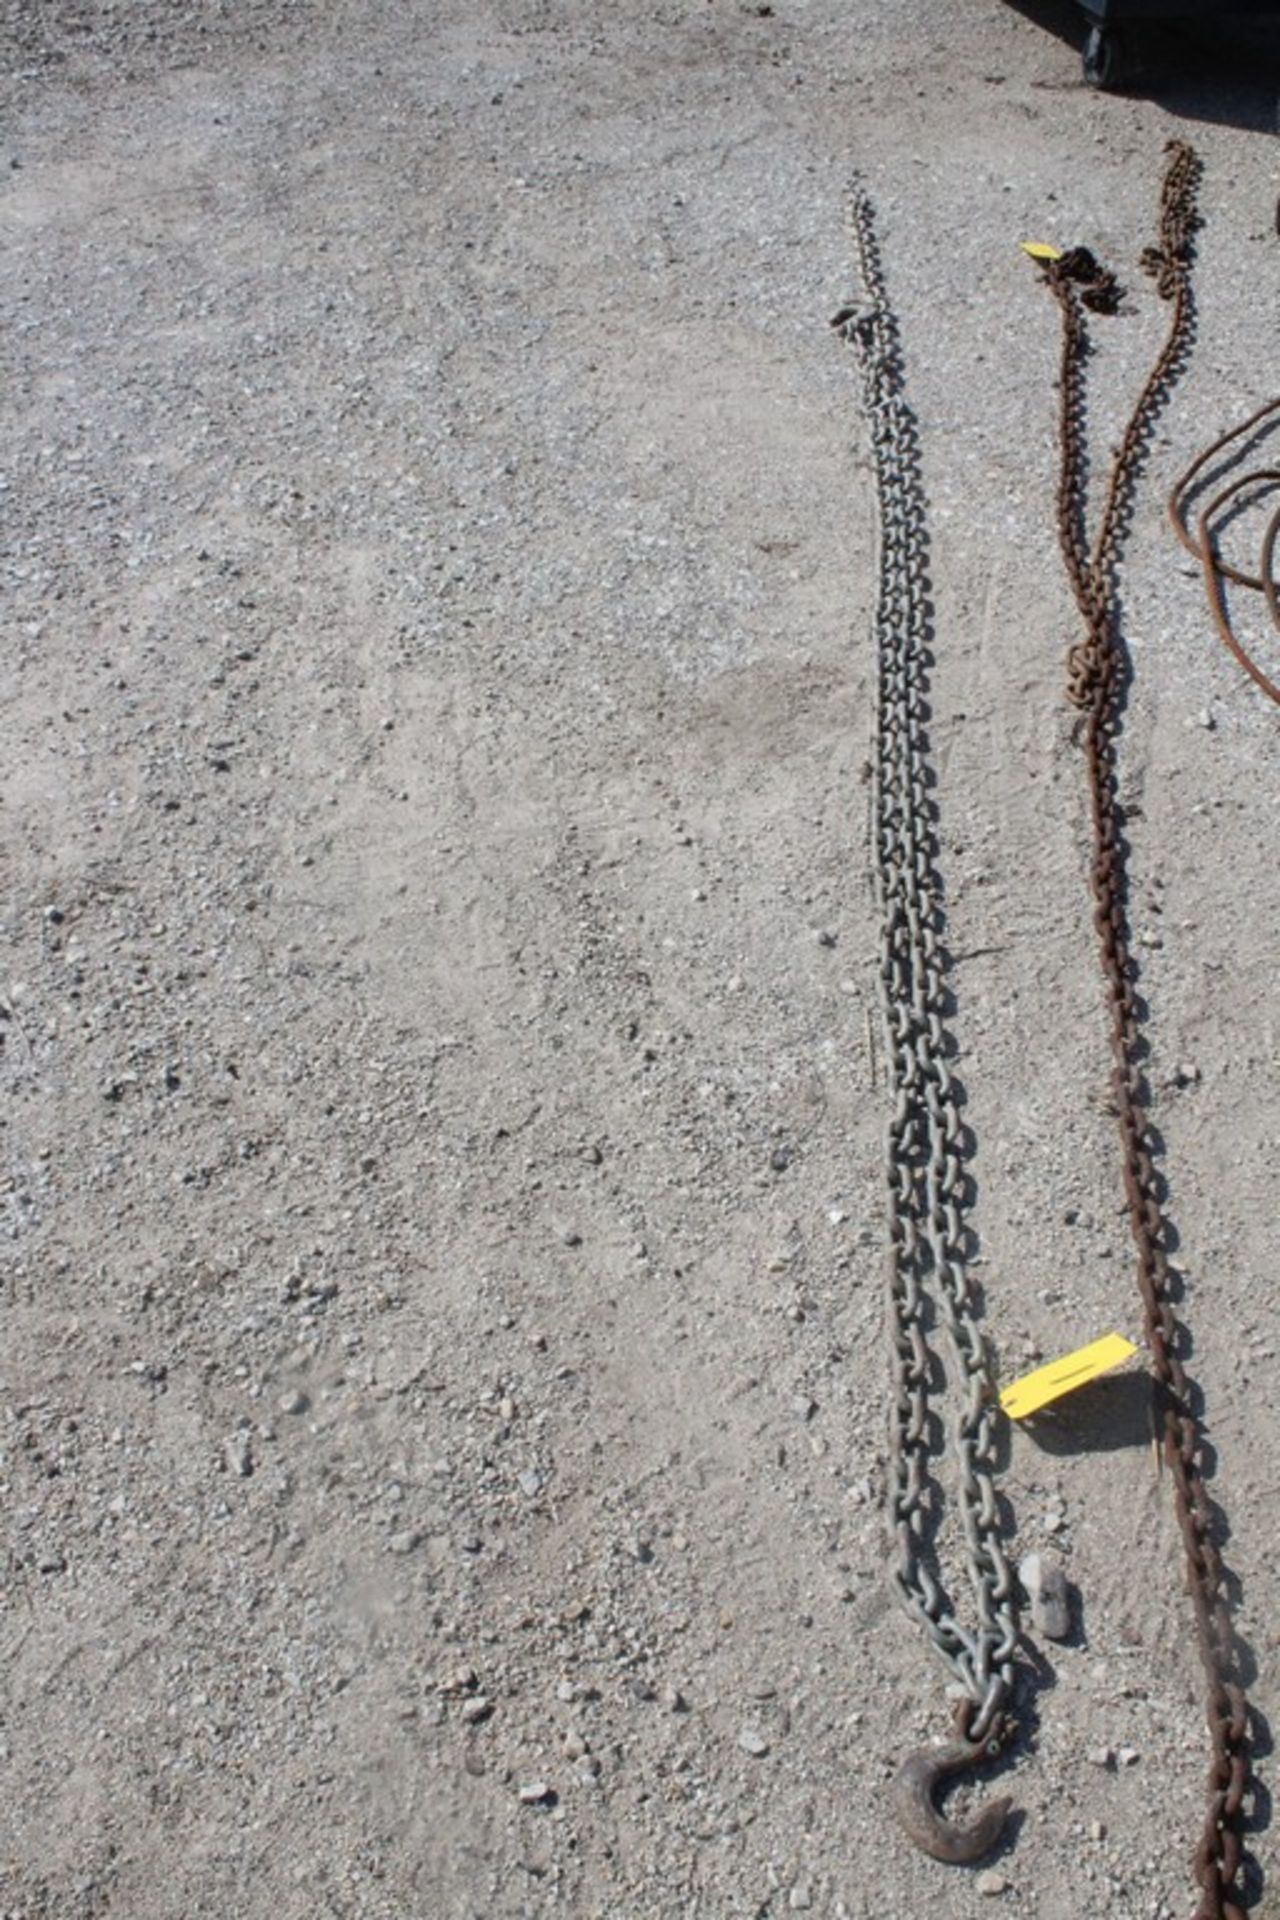 21-FT. CHAIN WITH TWO HOOKS